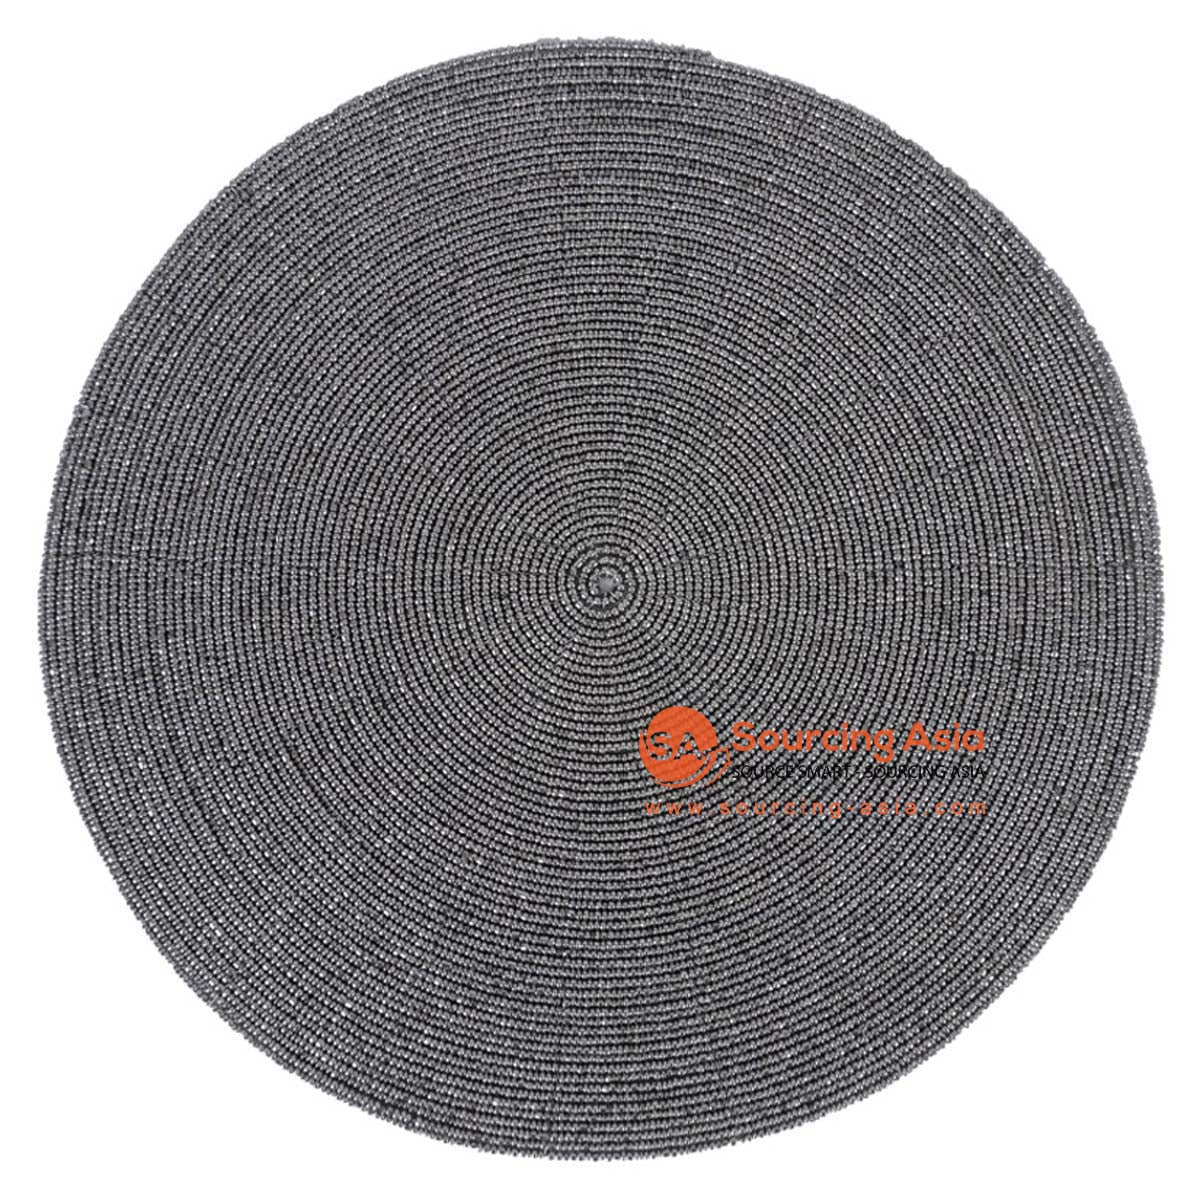 HBSC582 GREY BEADS ROUND PLACEMAT